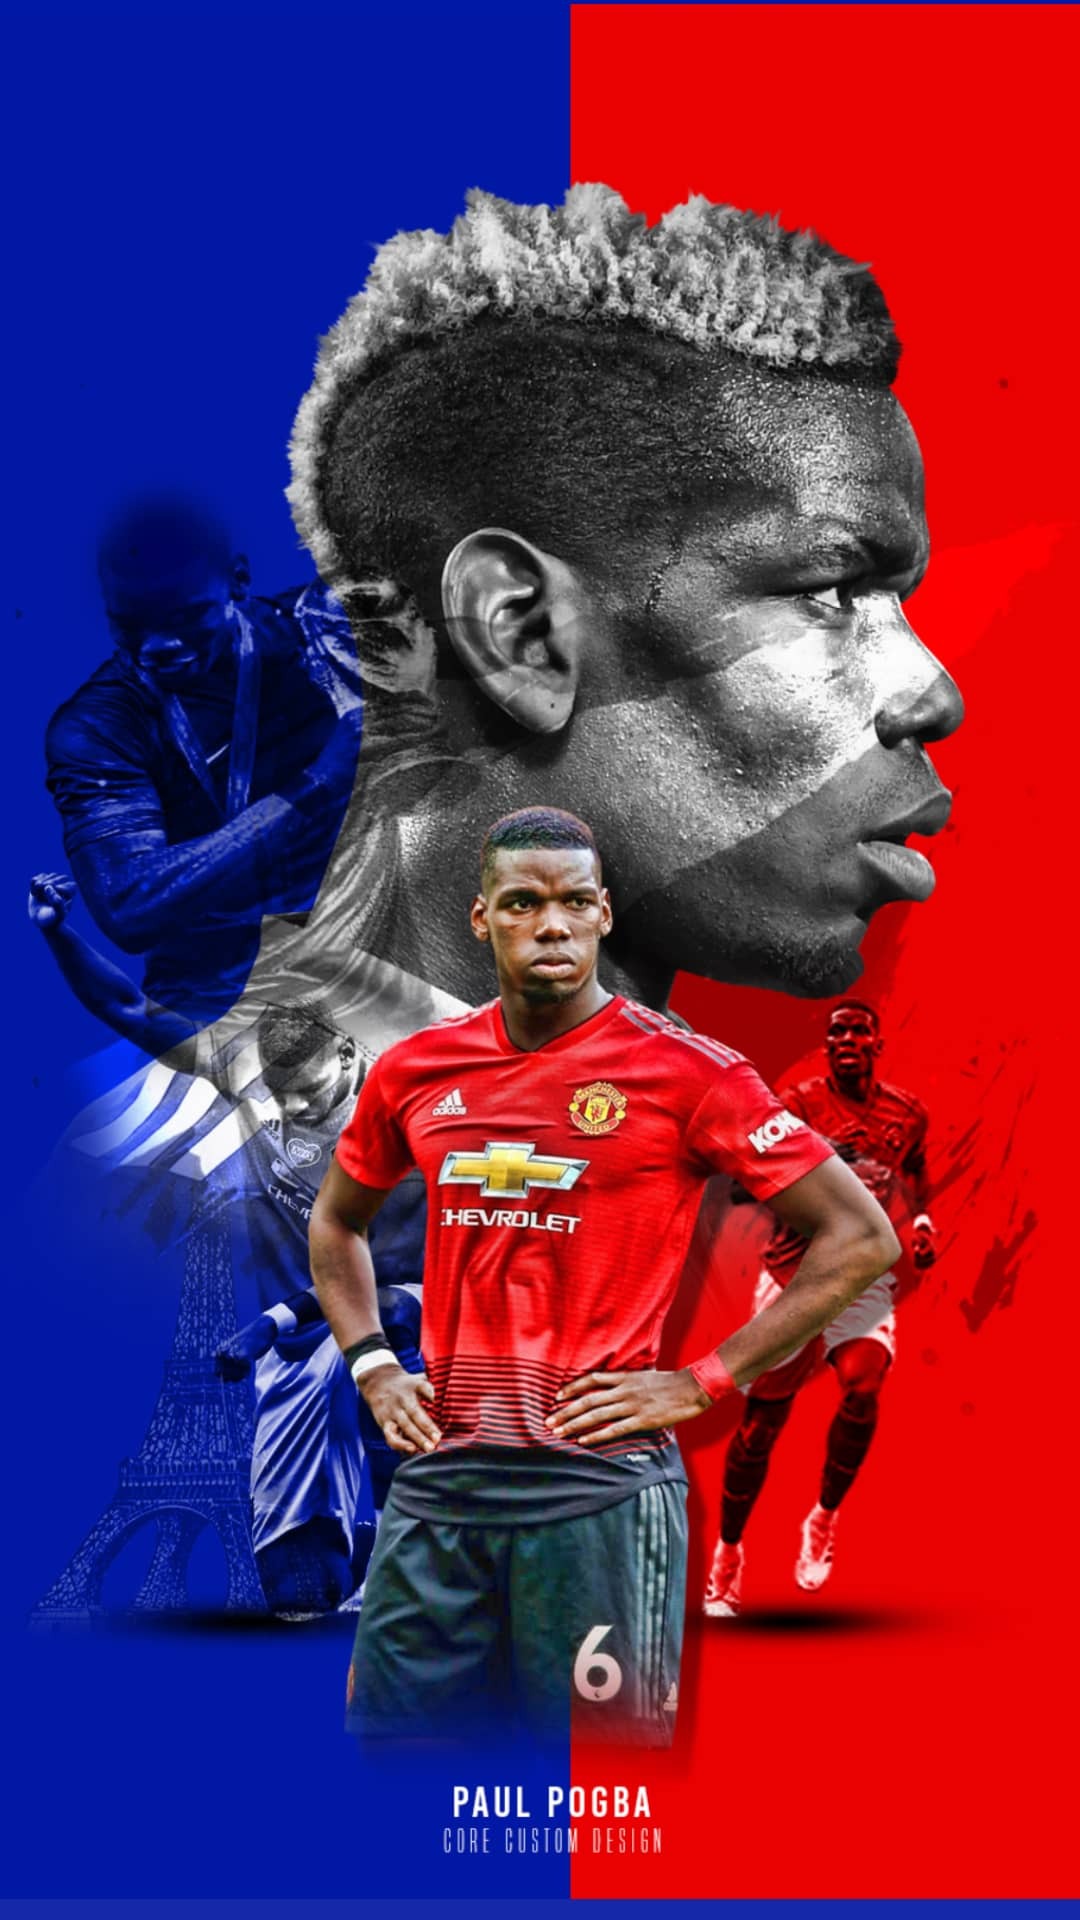 Paul Pogba Wallpaper HD Apk Download for Android- Latest version 1.0-  com.awesomewallpapers.PaulPogba